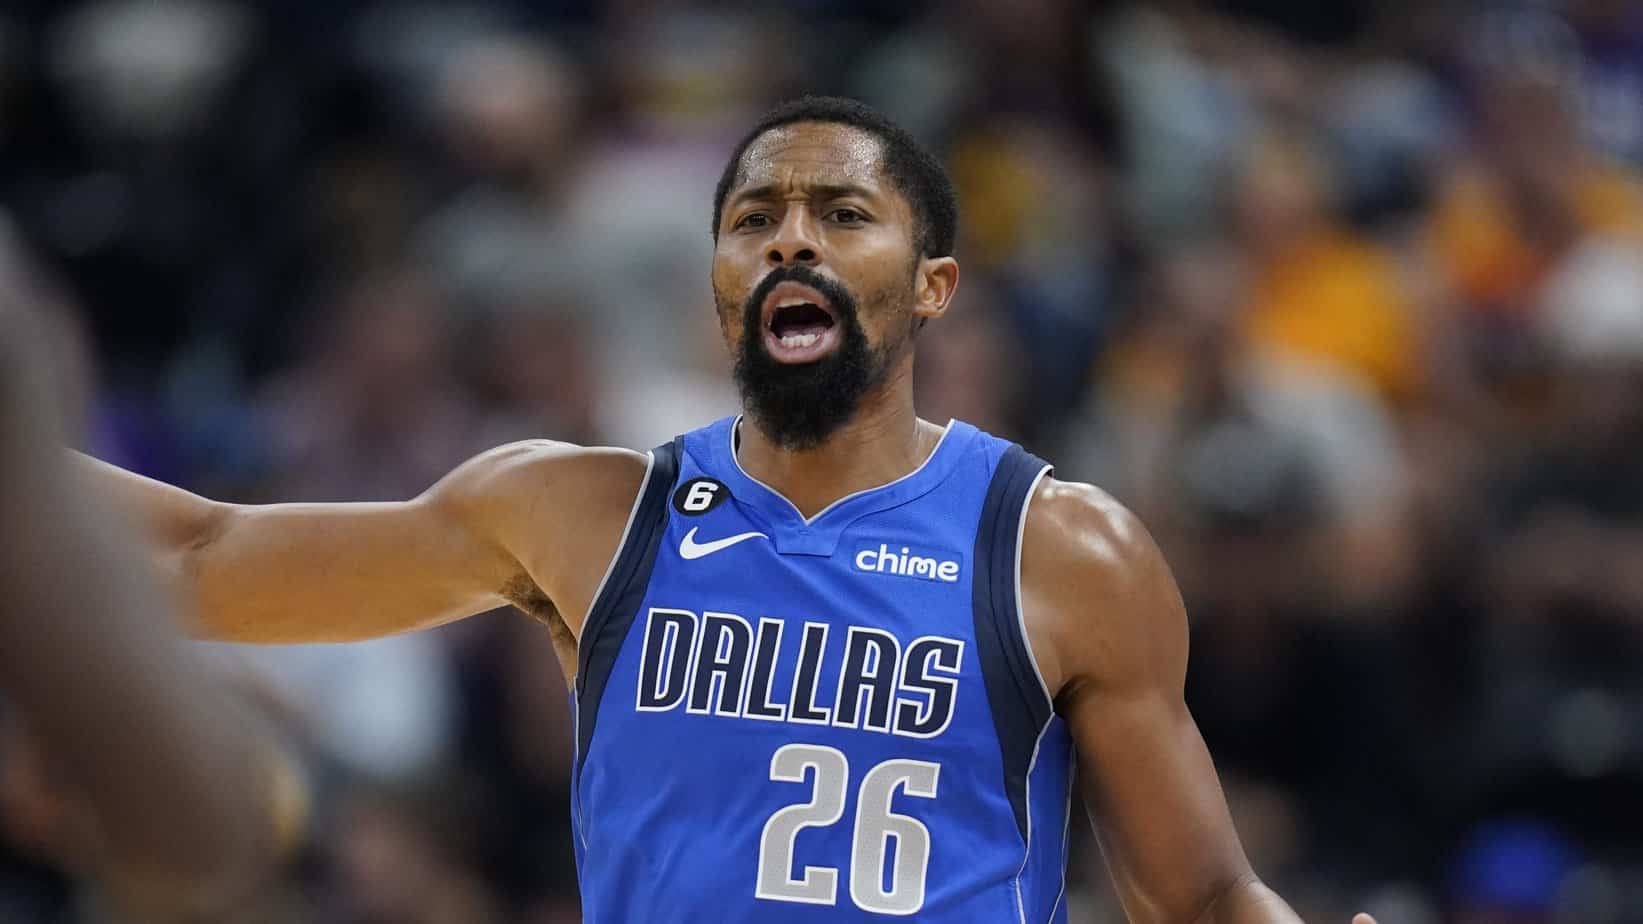 The NBA DFS building blocks for Saturday include Spencer Dinwiddie, who will have to carry the Mavericks with Luka Doncic injured...